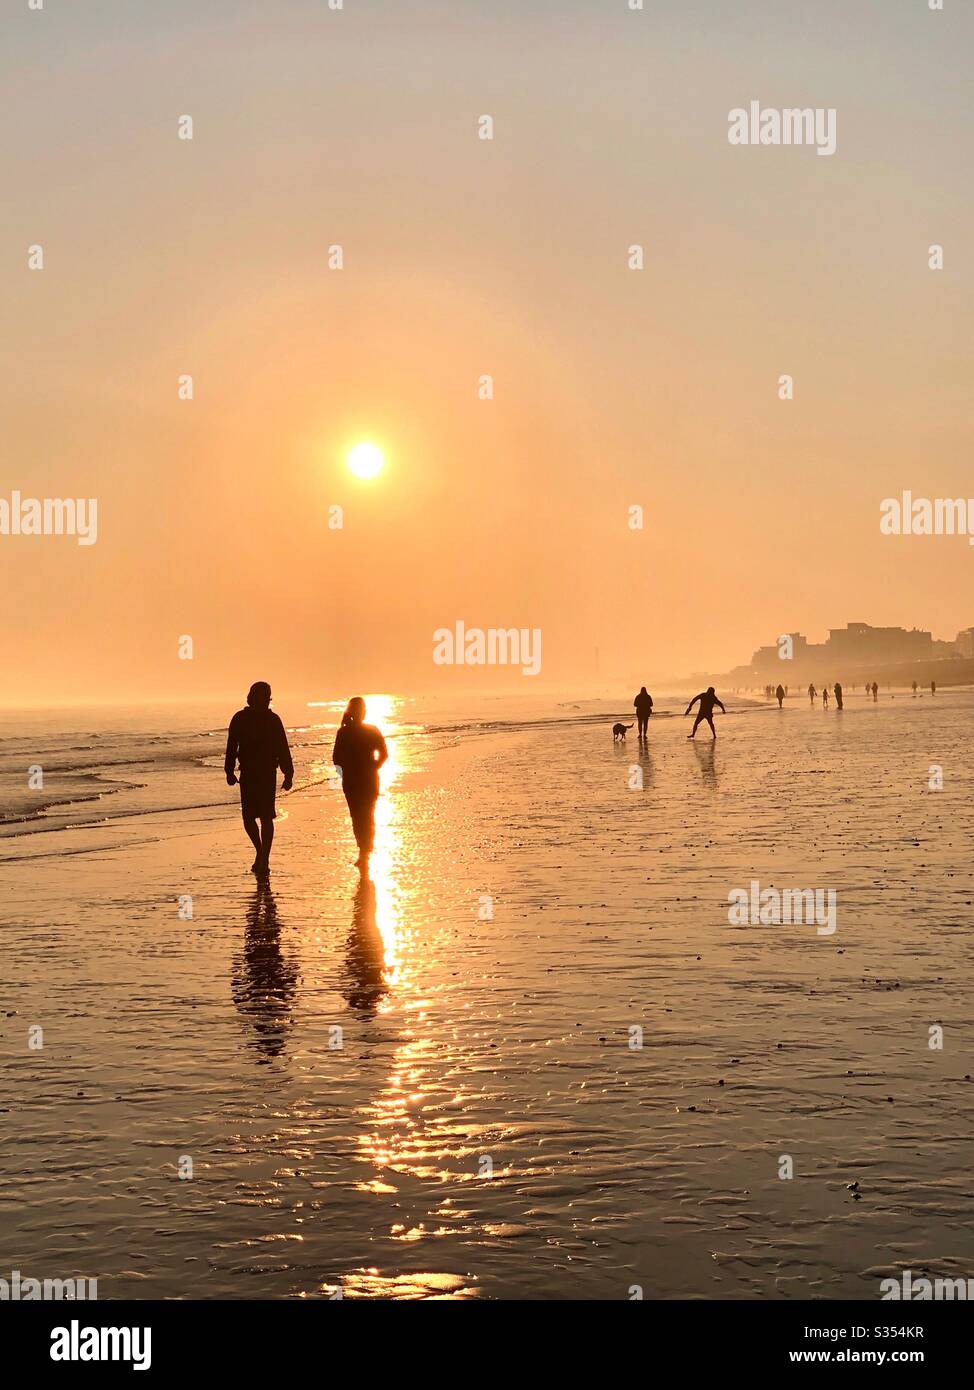 A couple walk silhouetted against the golden setting sun on a beach at low tide with other walkers in the background Stock Photo